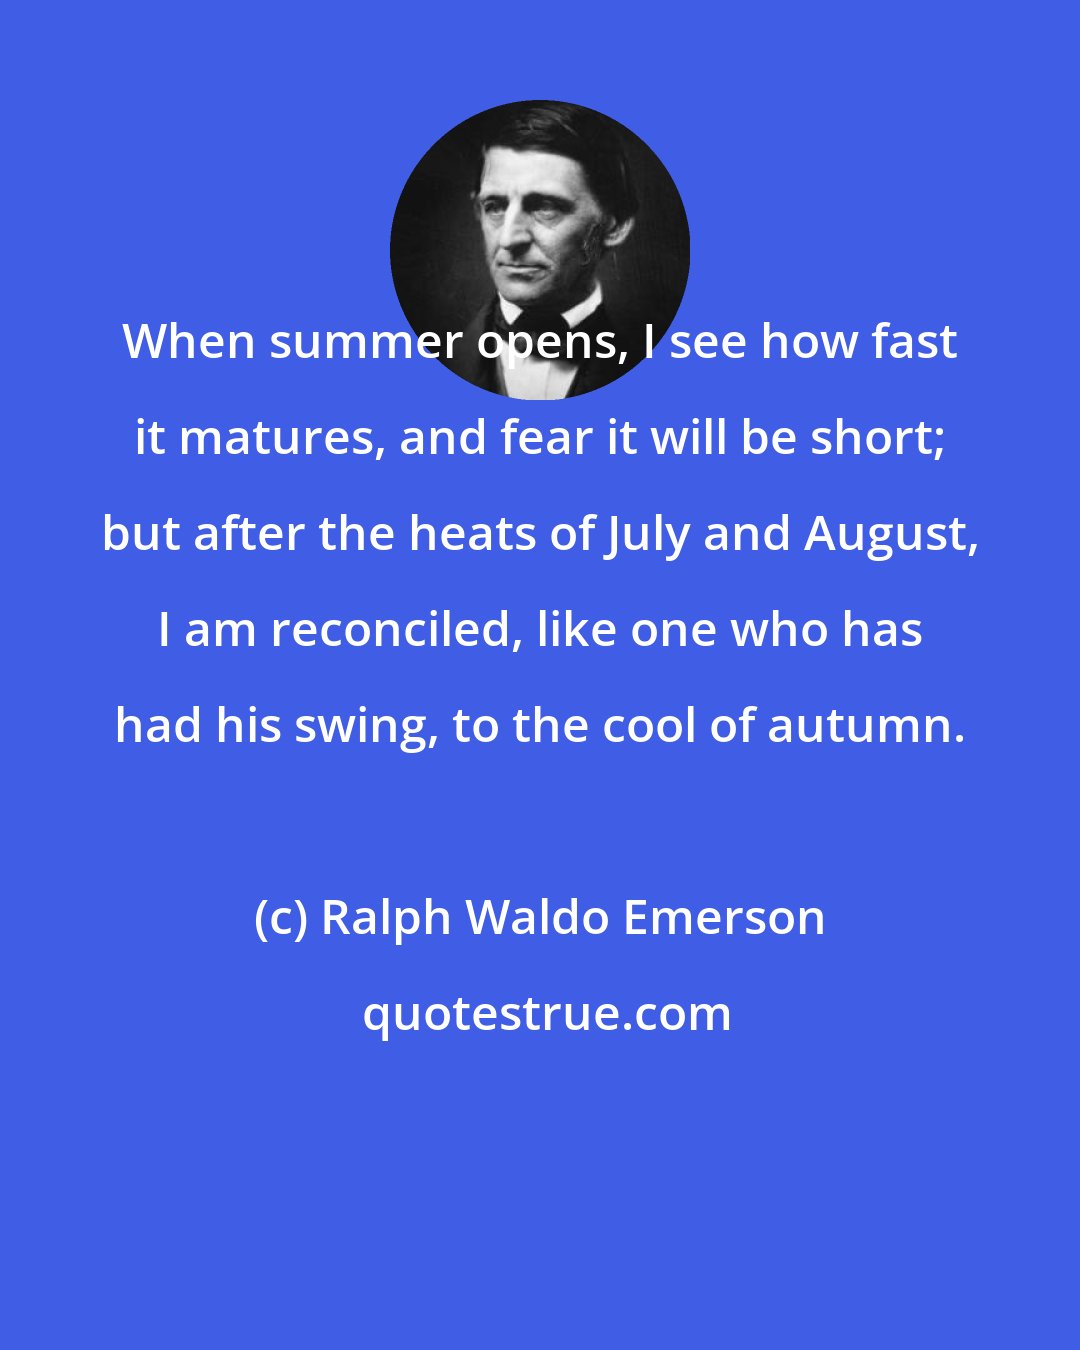 Ralph Waldo Emerson: When summer opens, I see how fast it matures, and fear it will be short; but after the heats of July and August, I am reconciled, like one who has had his swing, to the cool of autumn.